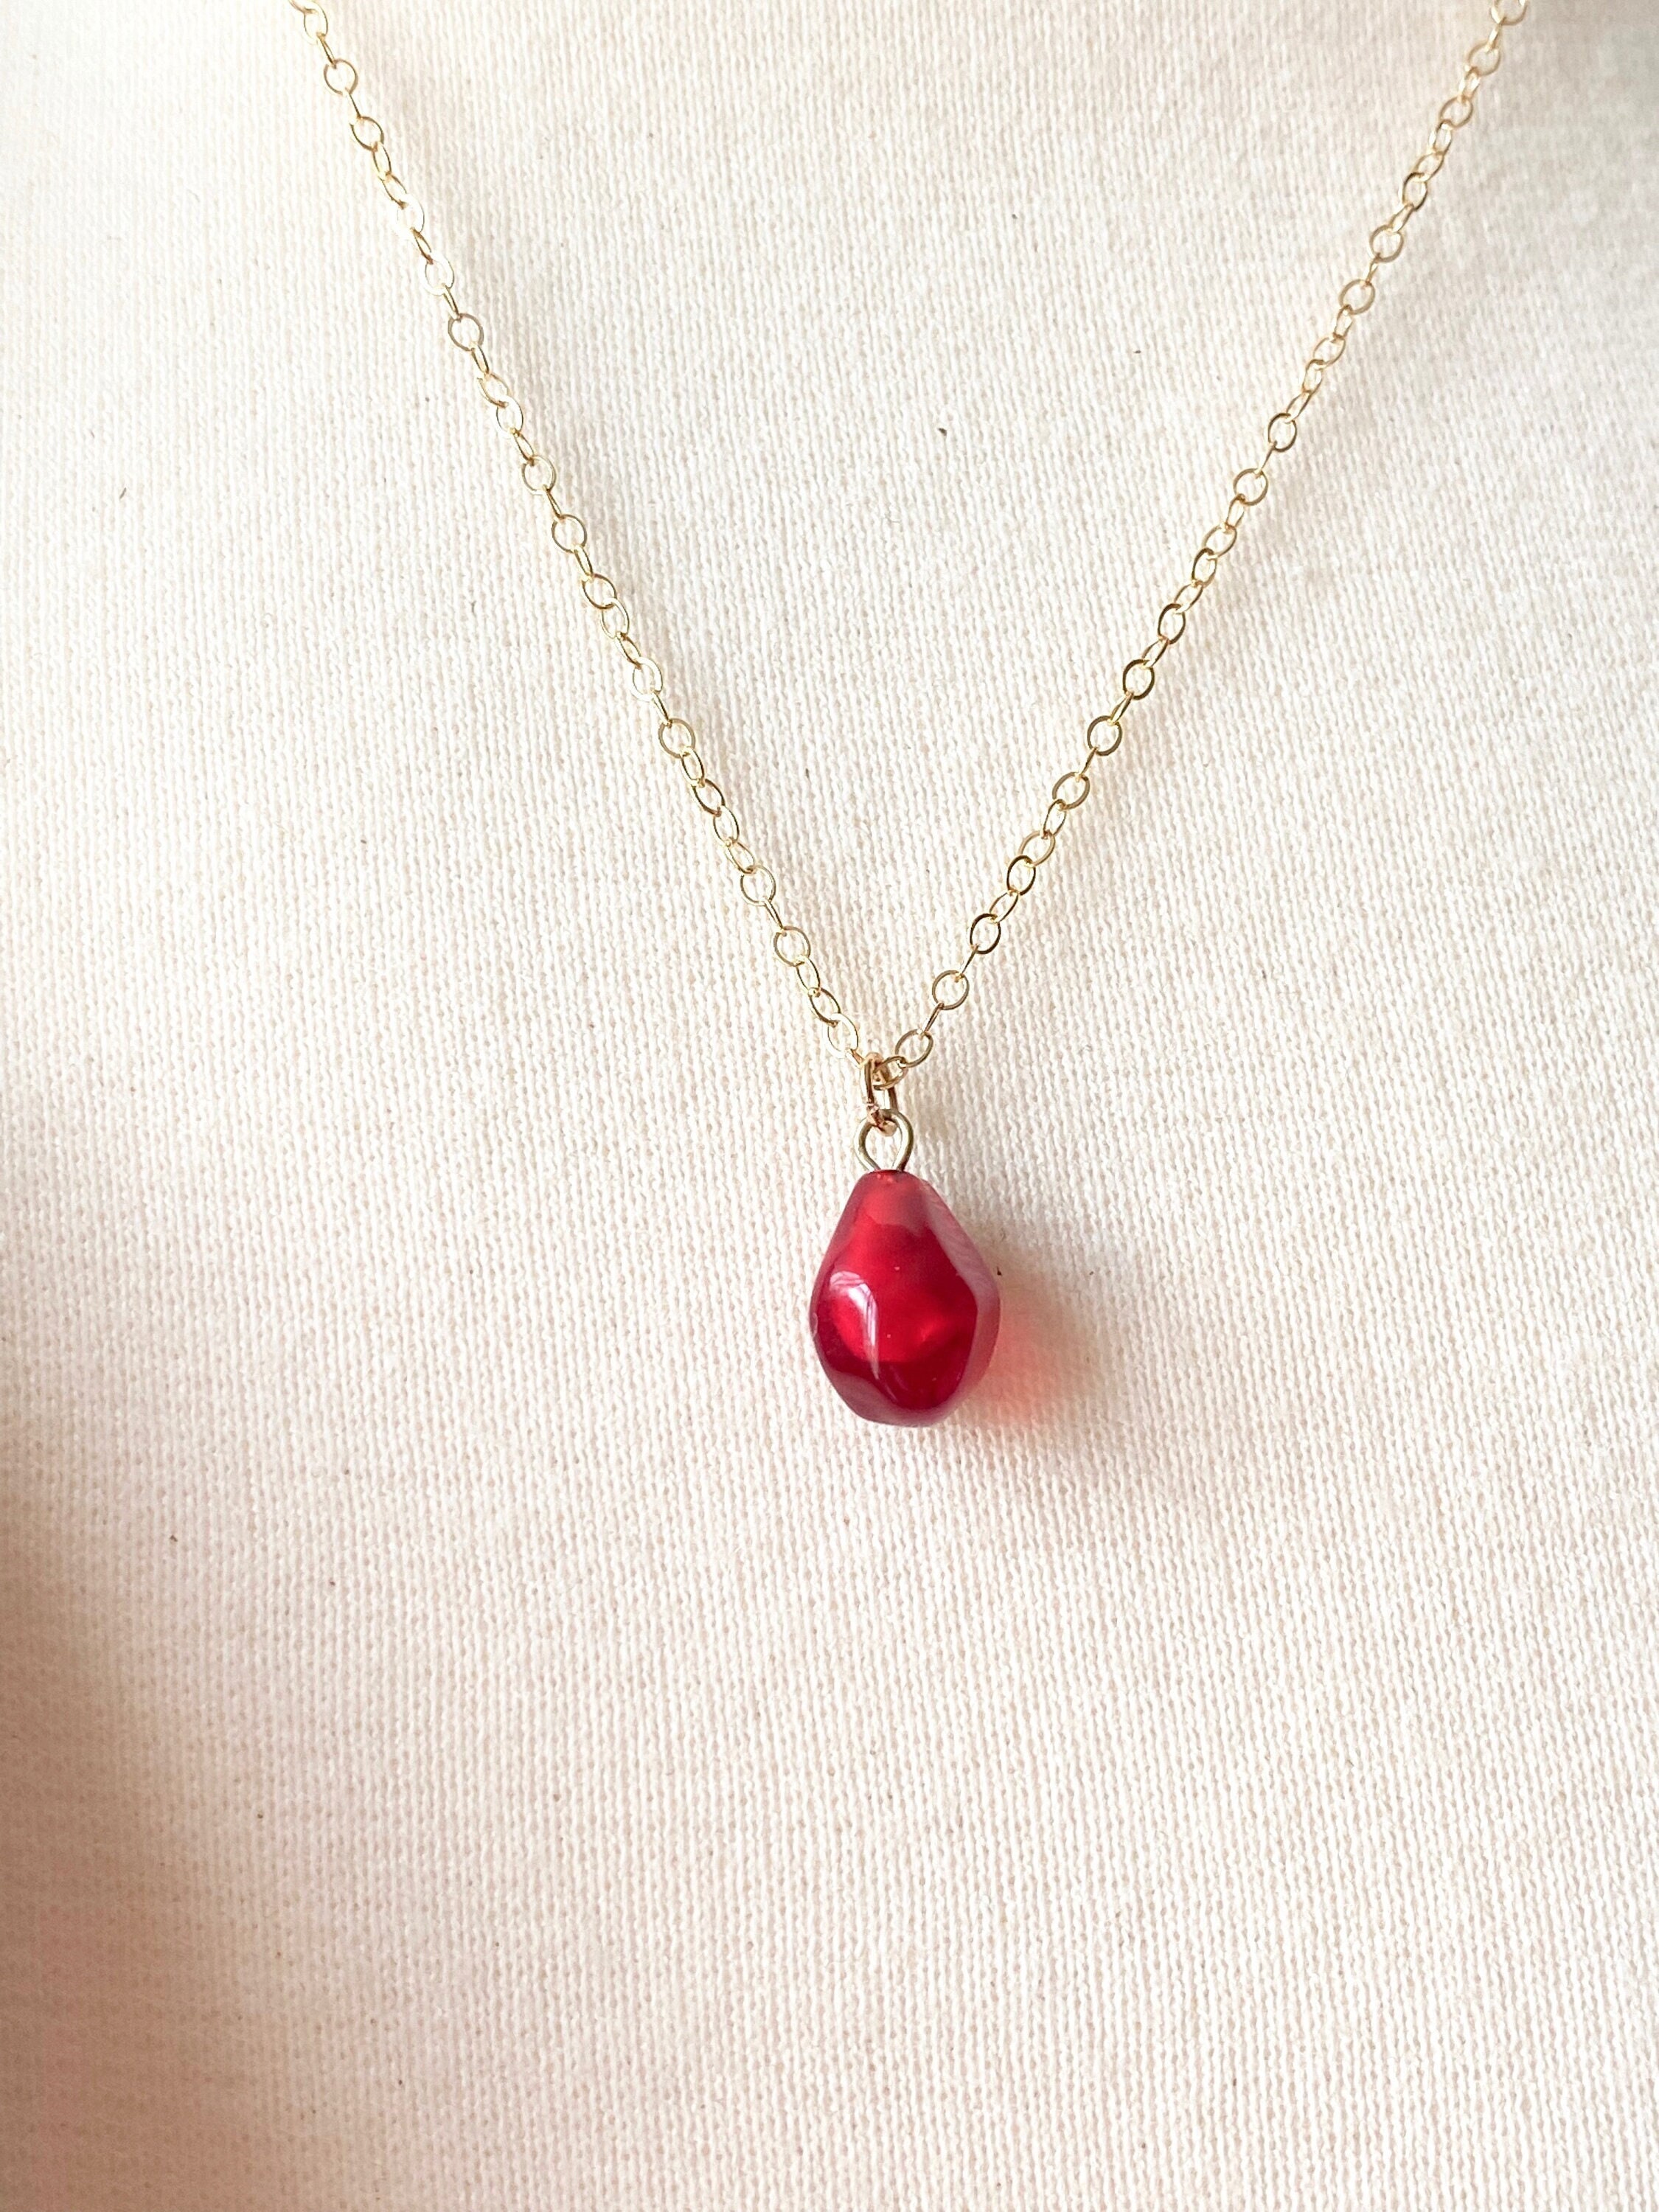 Buy Pomegranate Seed Necklace Prosperity Love Fertility Charm Online in  India - Etsy